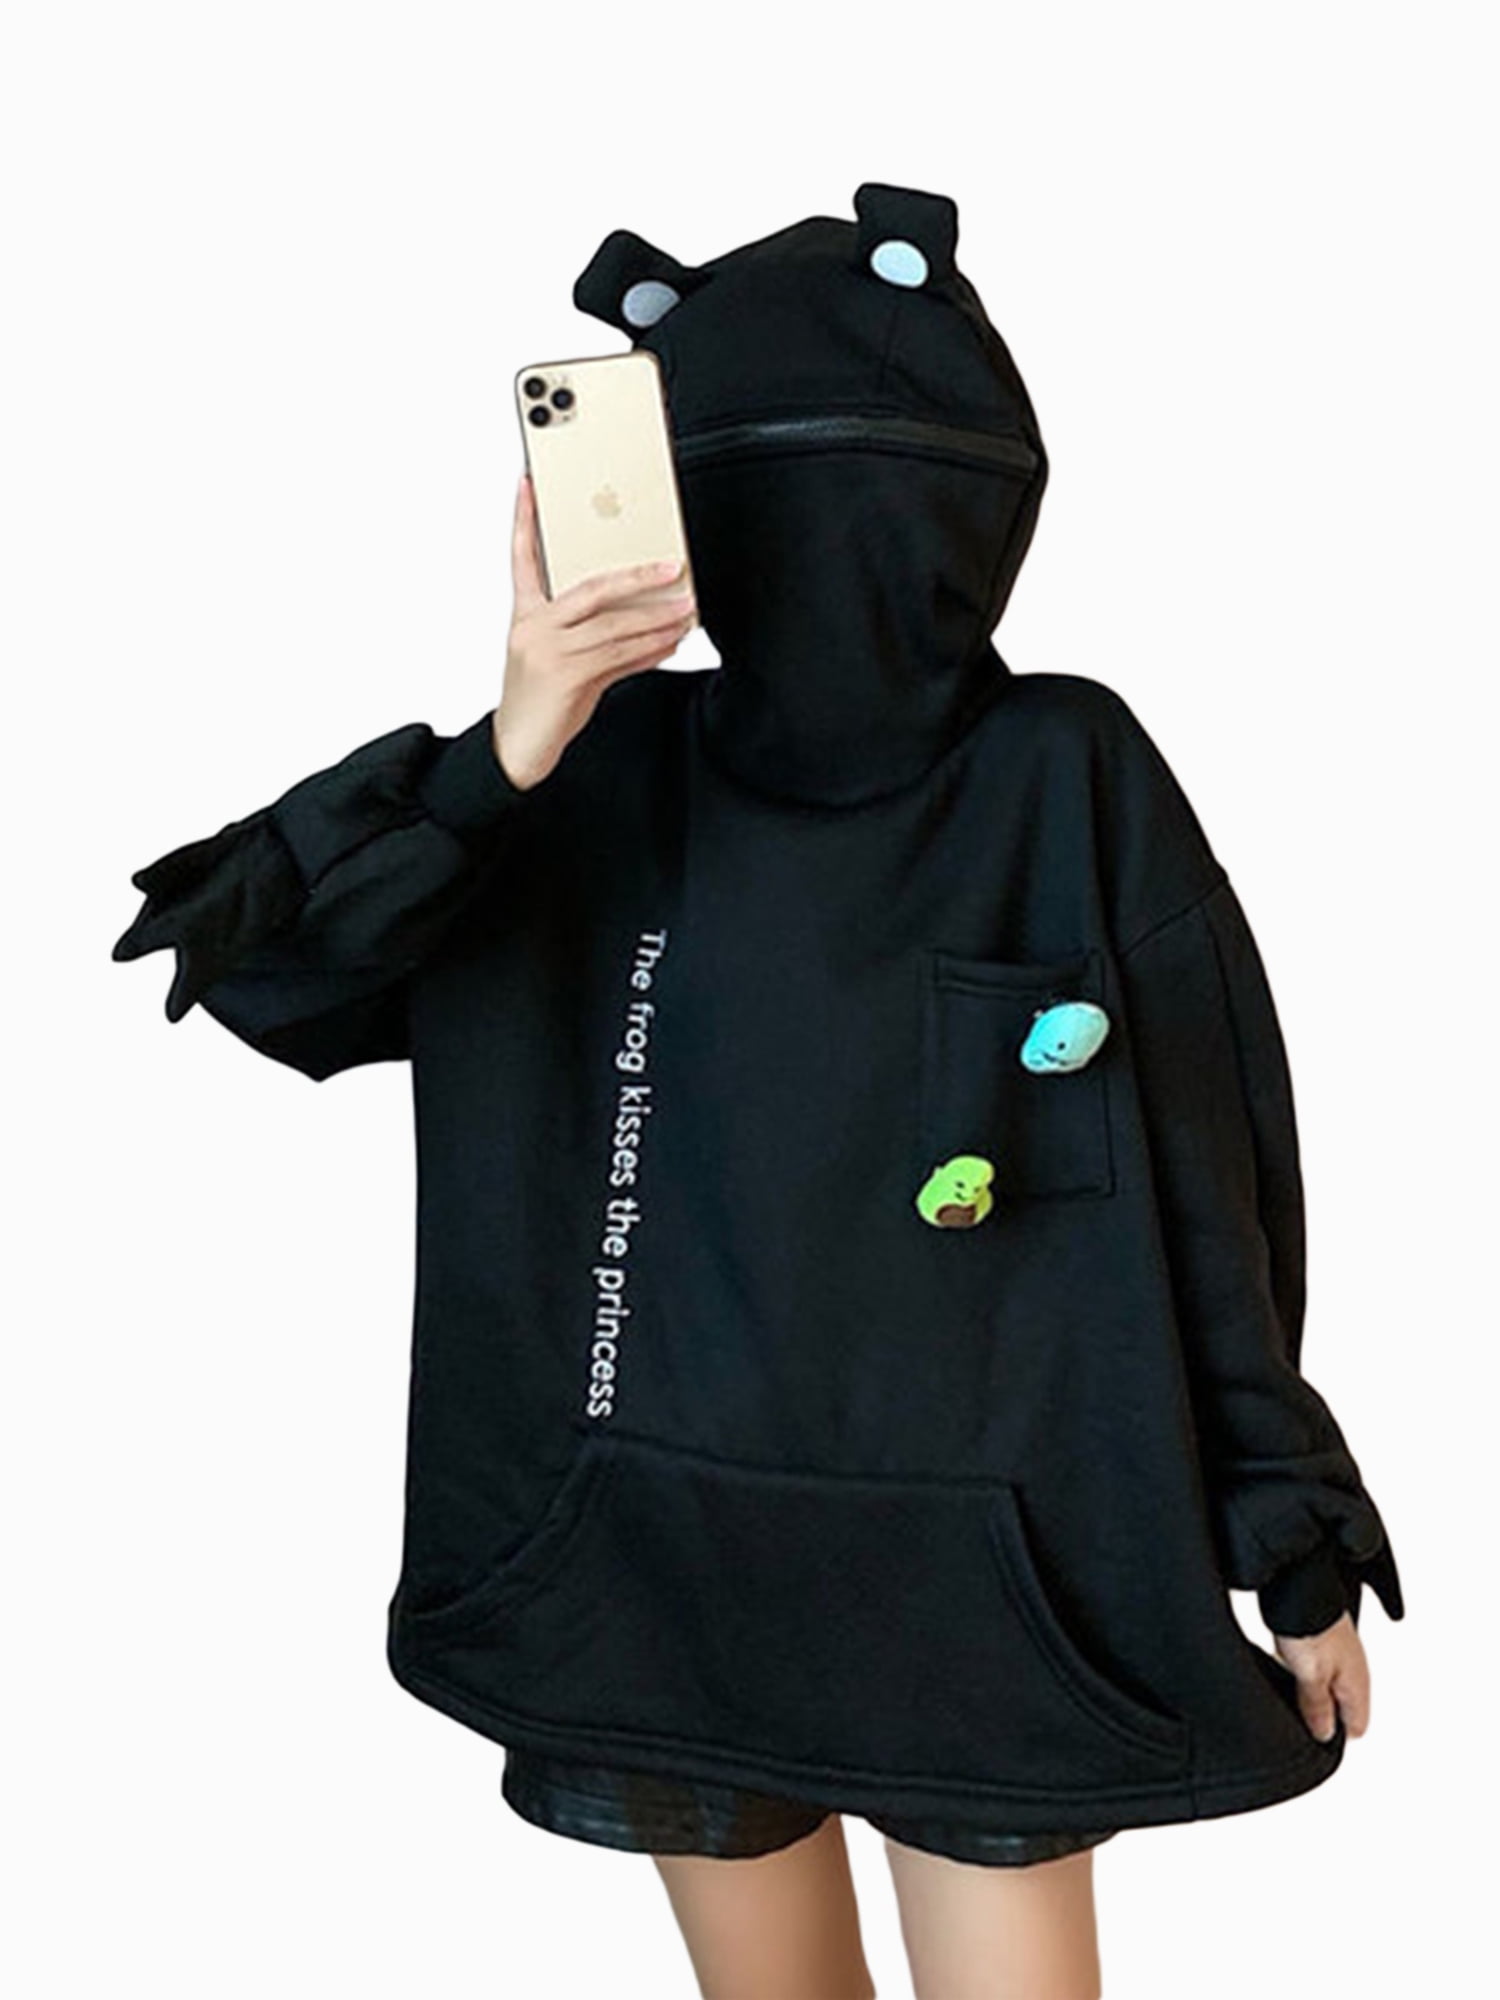 Youweixiong Funny Frog Hoodie for Women Men Zip up Animal Hooded Top  Sweatshirt Pullover with Large Front Pocket 